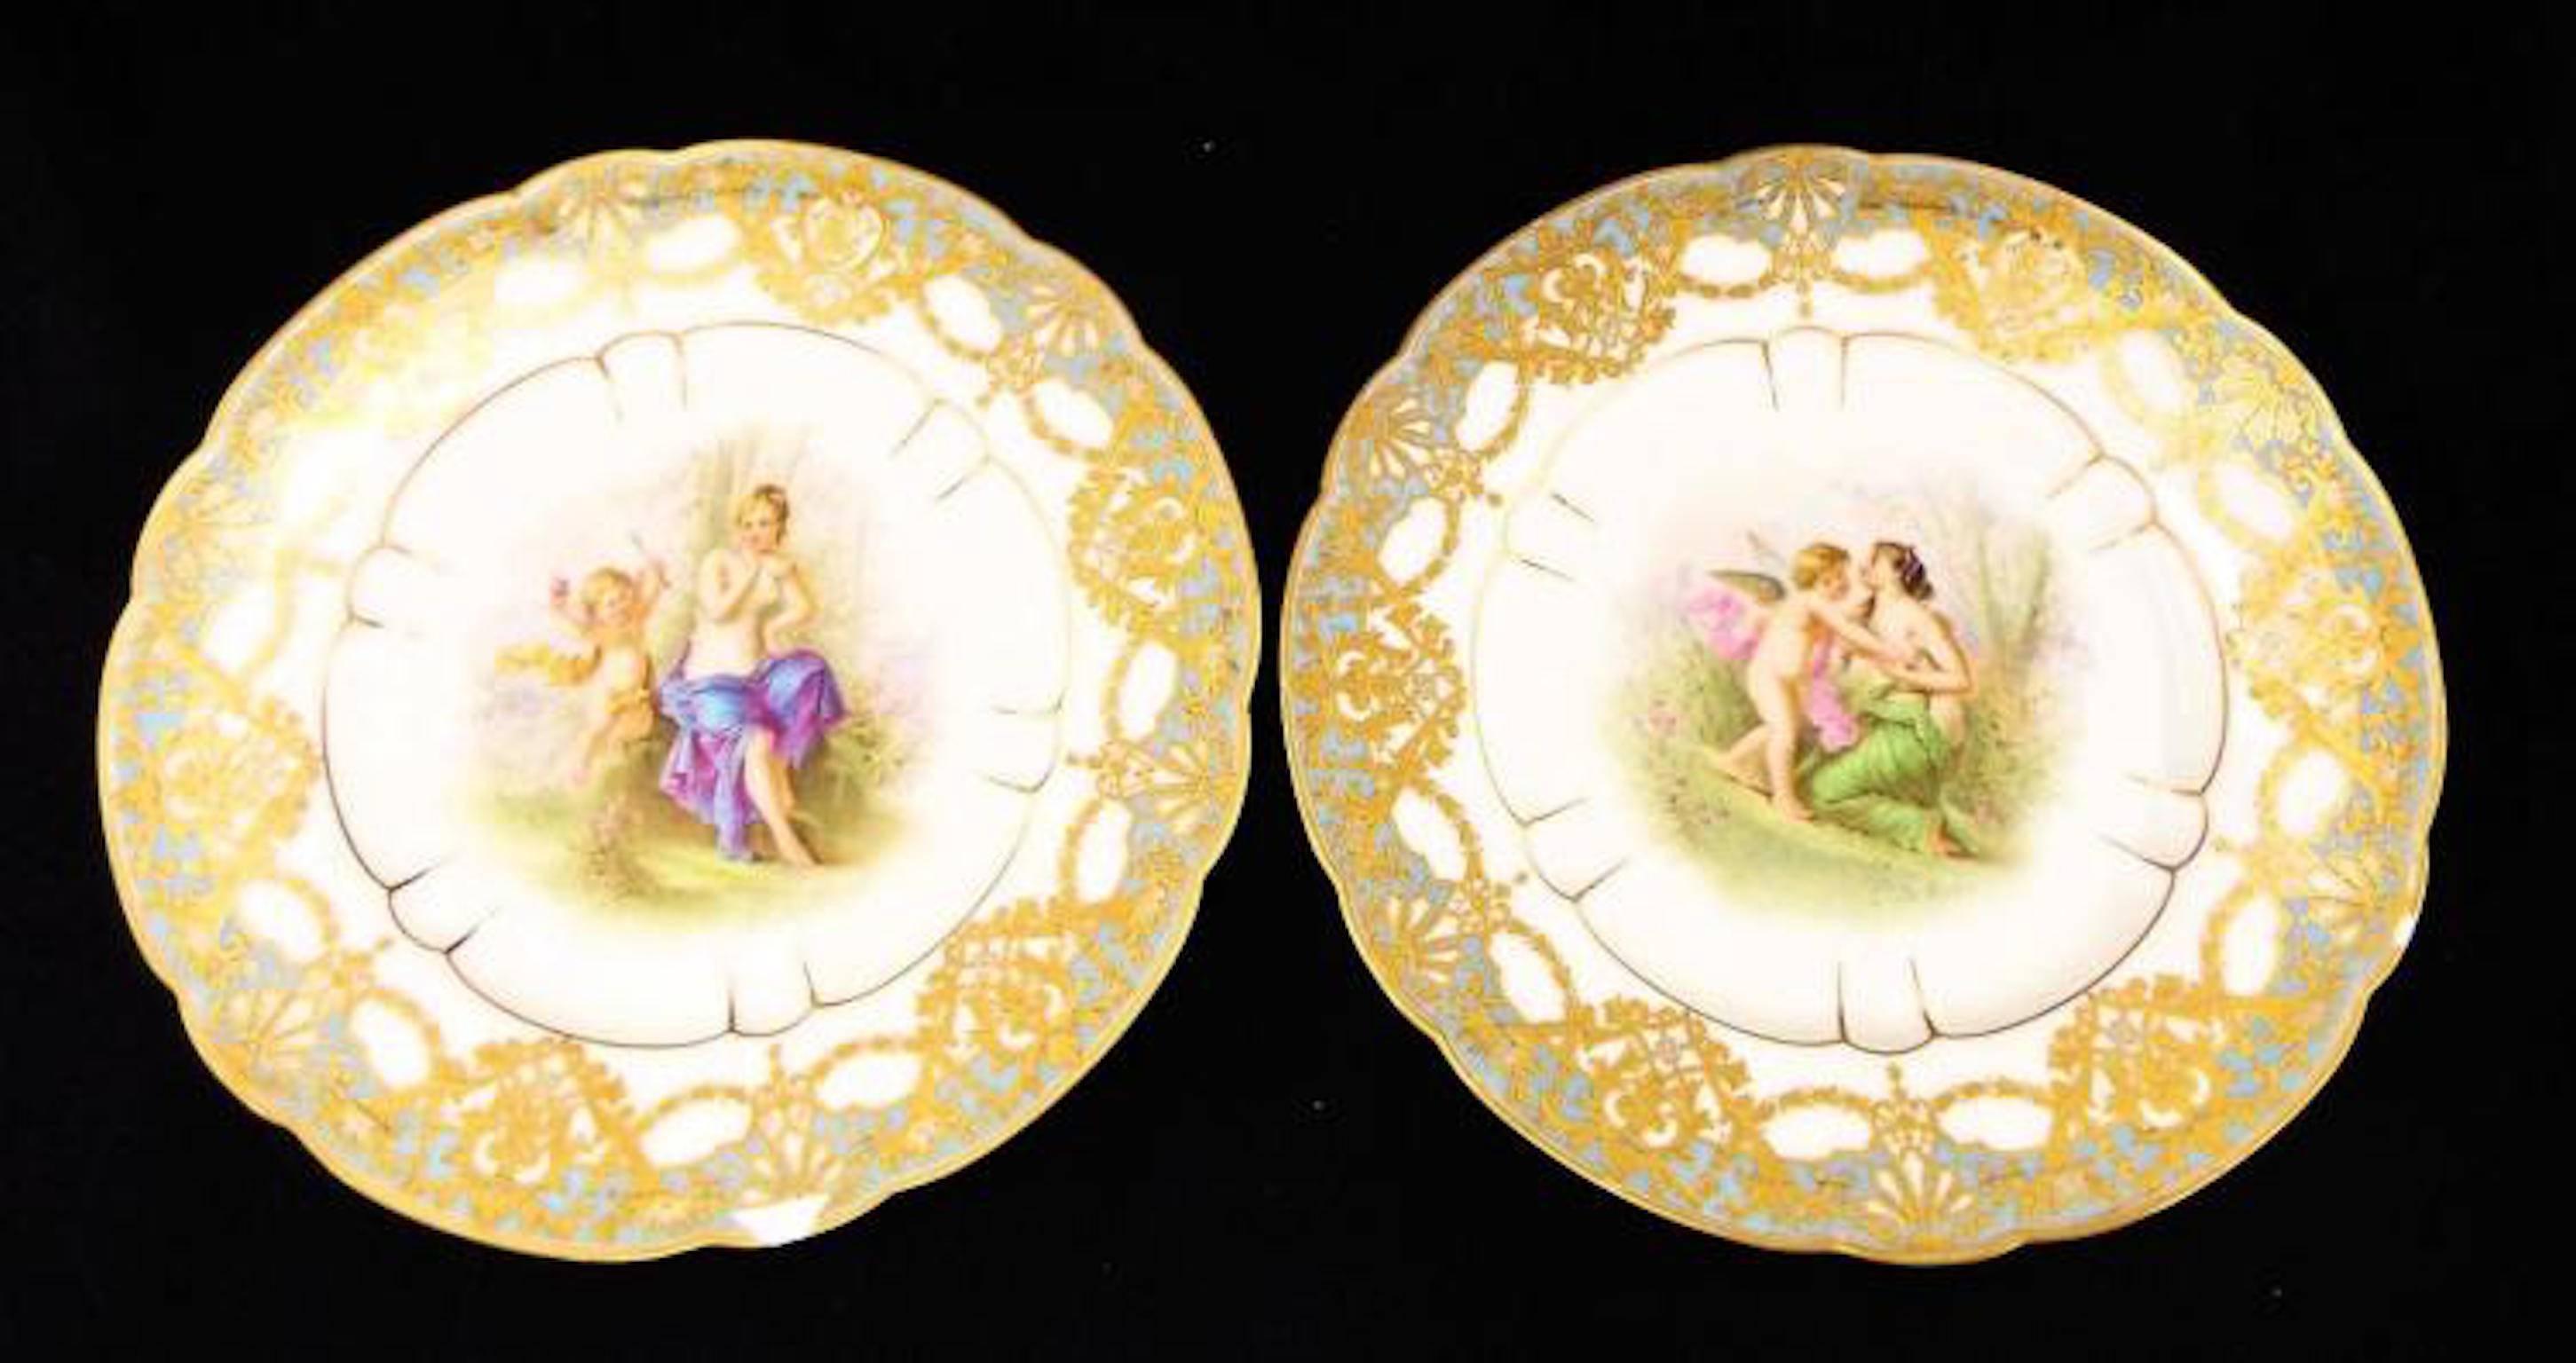 Cherub scenes. Bear mark on back. Both plates show wear on rims. 9.5" diameter. Signed.

Sèvres porcelain, French hard-paste, or true, porcelain as well as soft-paste porcelain (a porcellaneous material rather than true porcelain) made at the